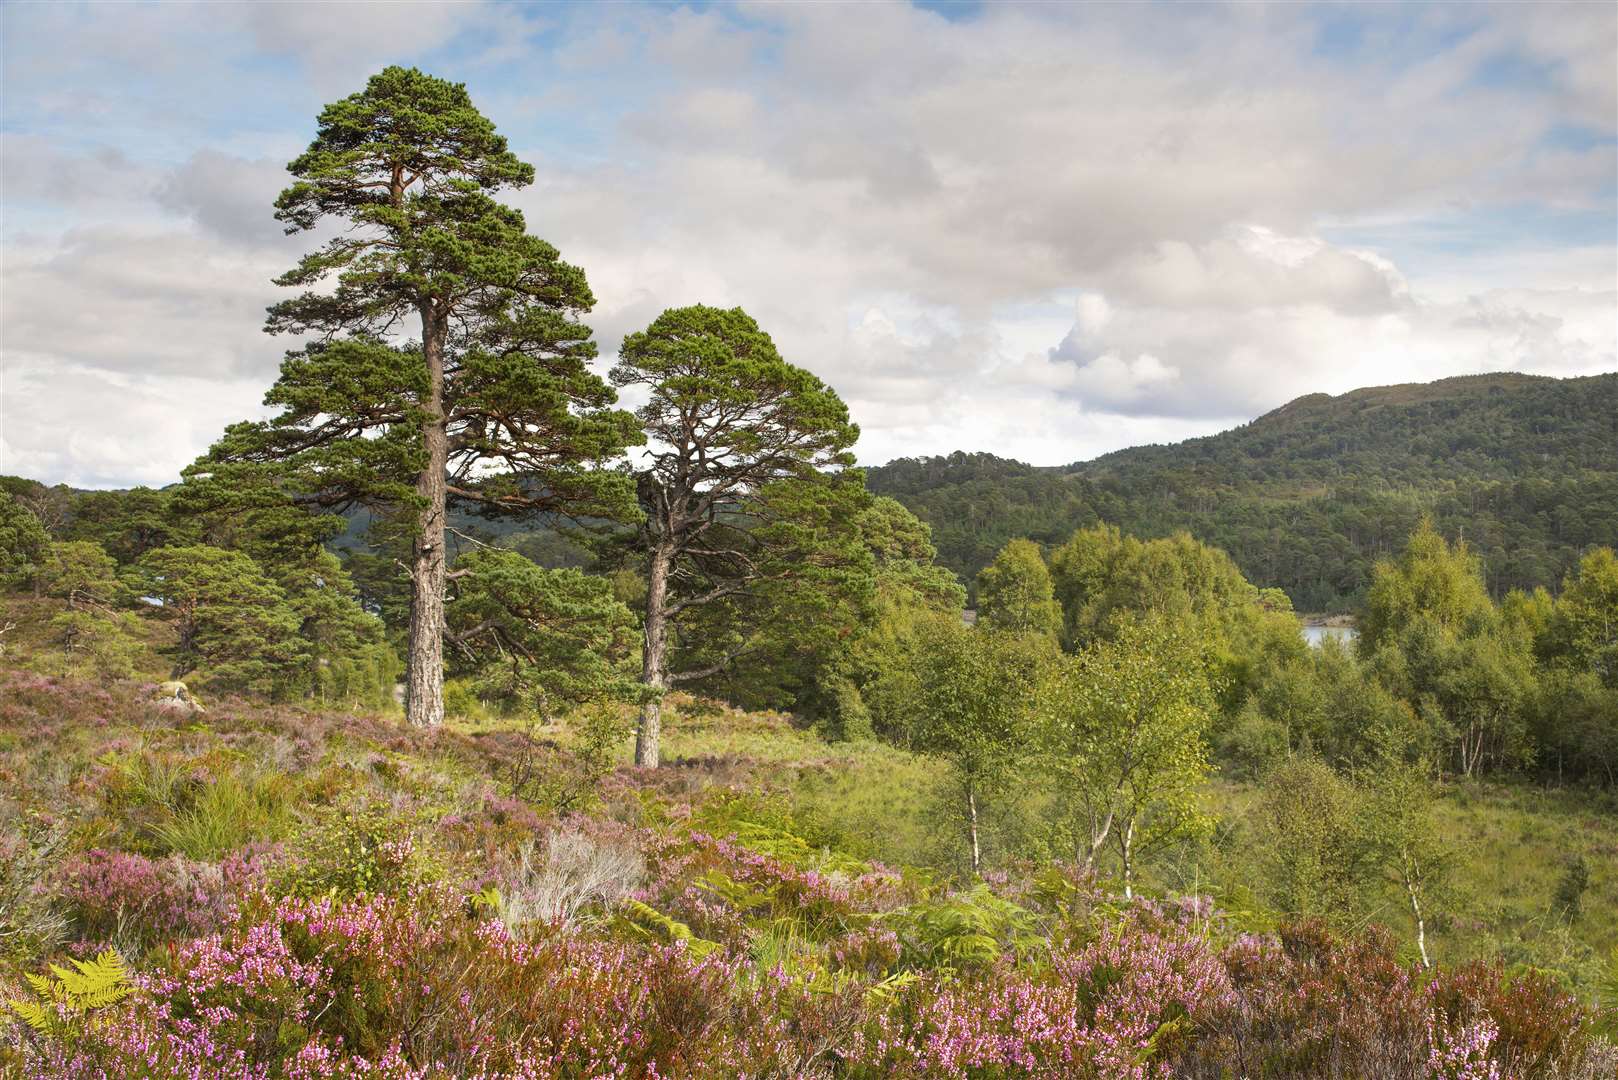 The project would rewild areas including Glen Affric (Grant Willoughby/Trees For Life/PA)